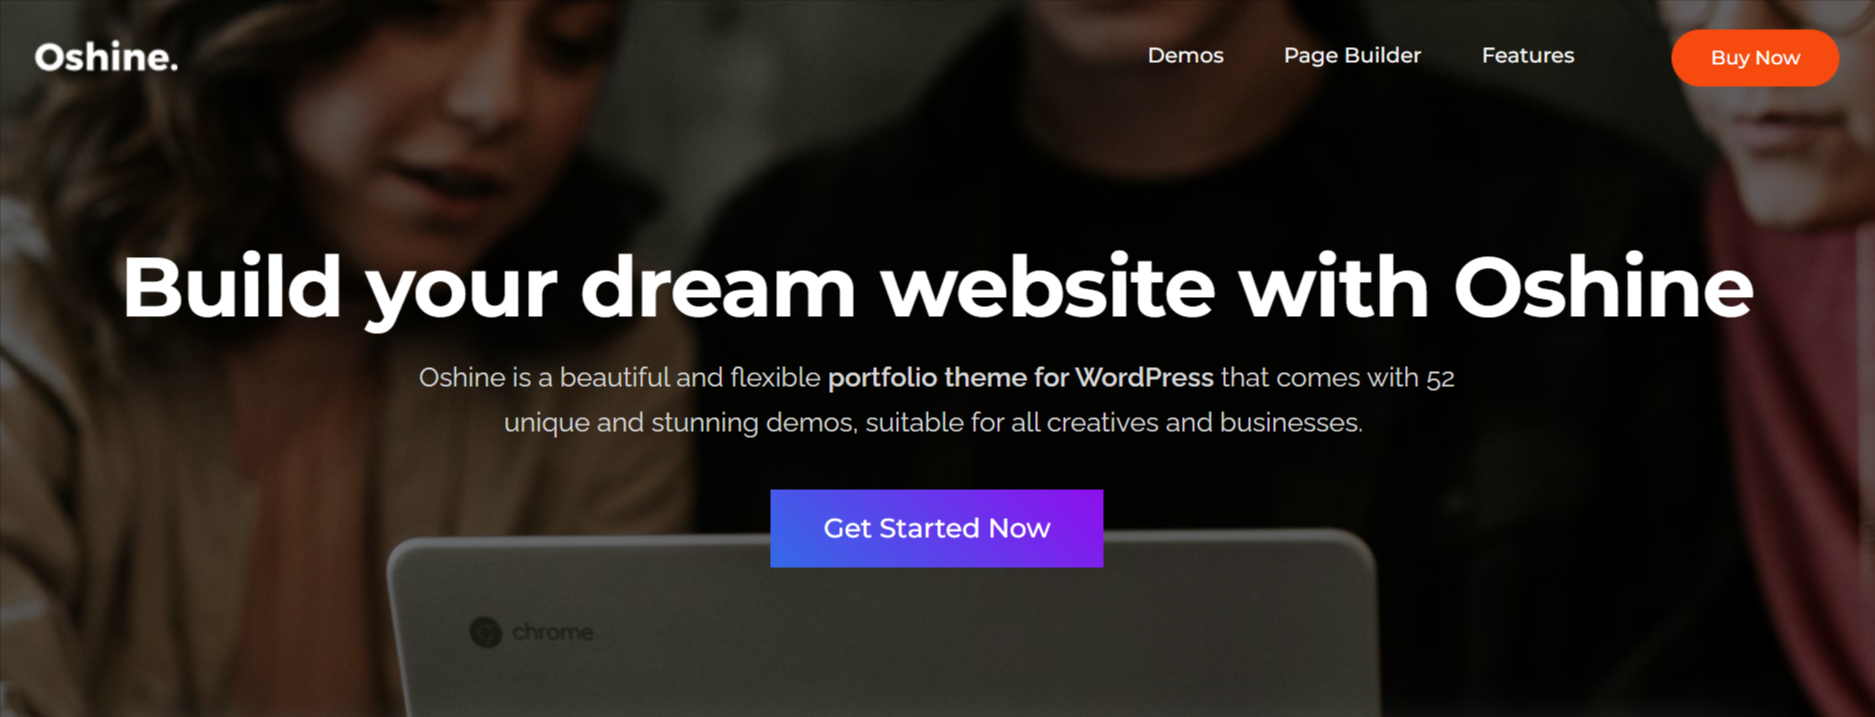 Oshine - est WordPress Themes for Writers and Authors